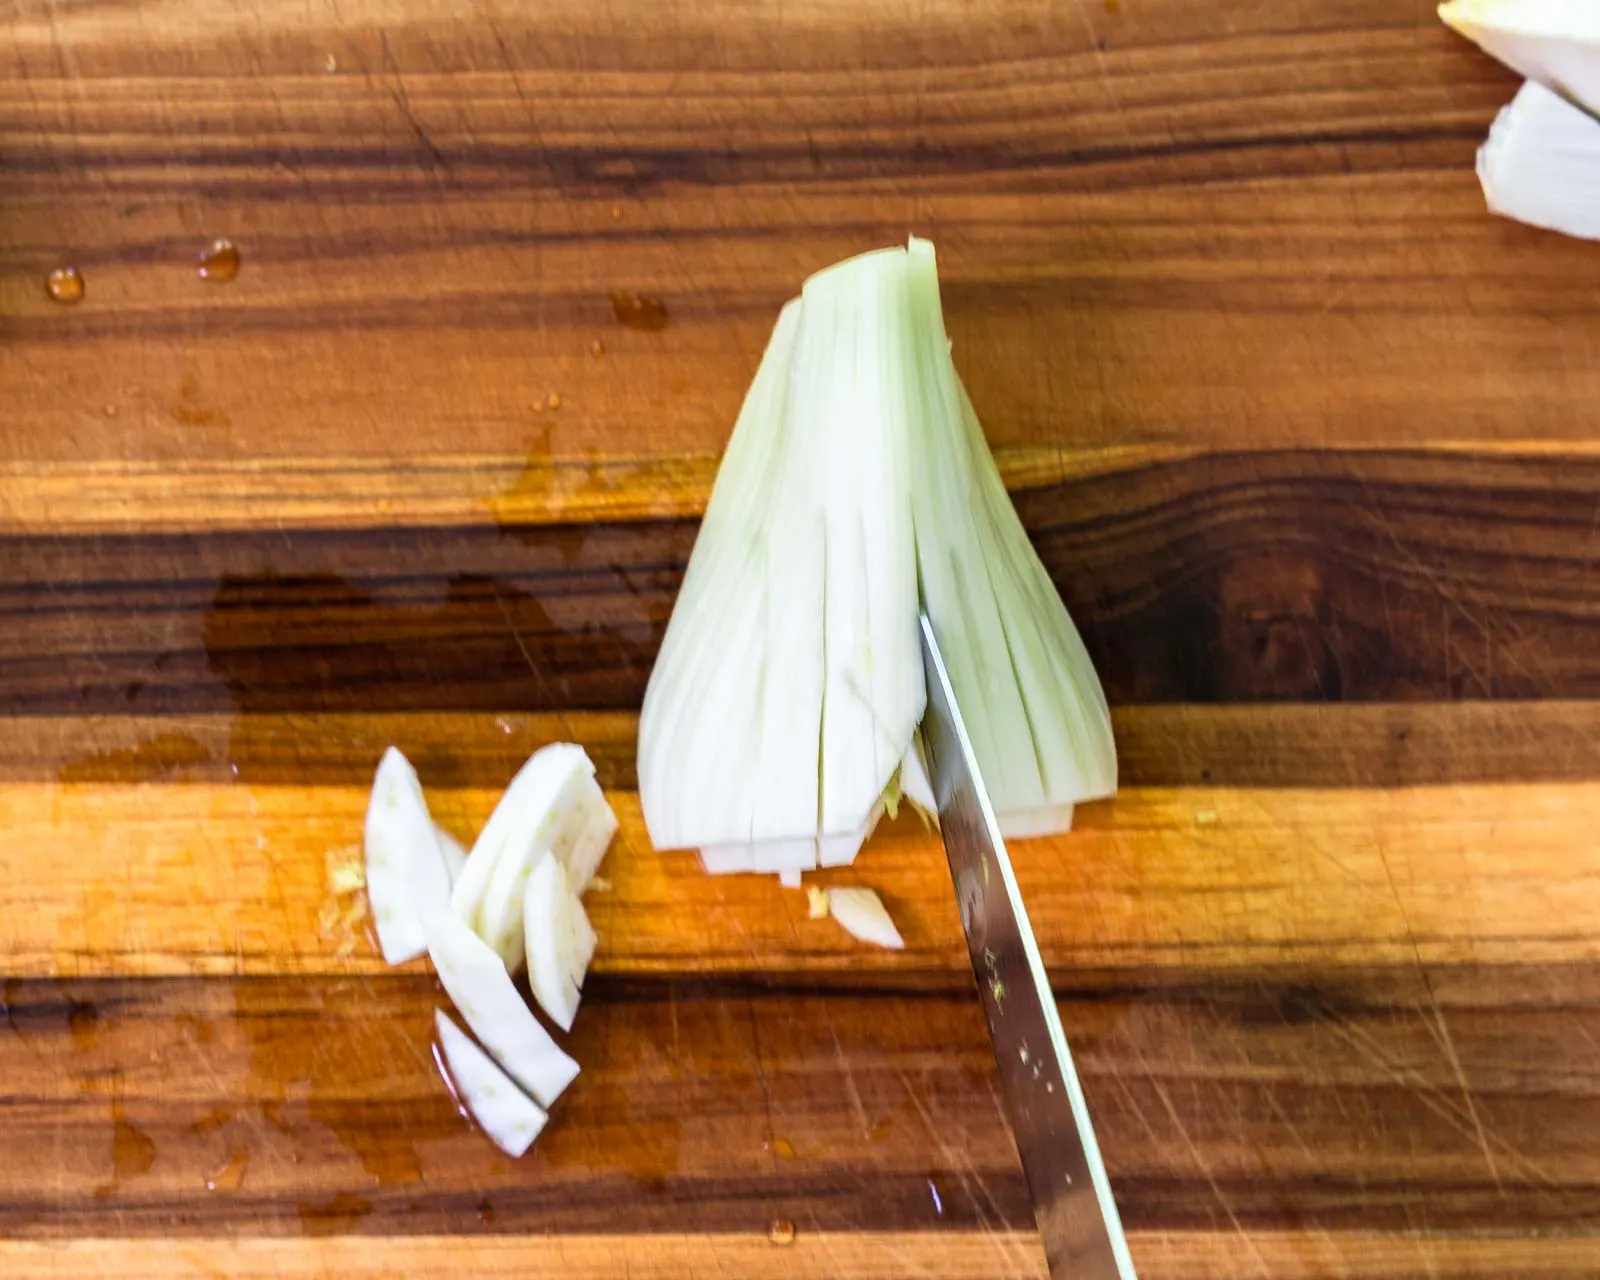 A piece of fennel cut in half and sliced vertically.